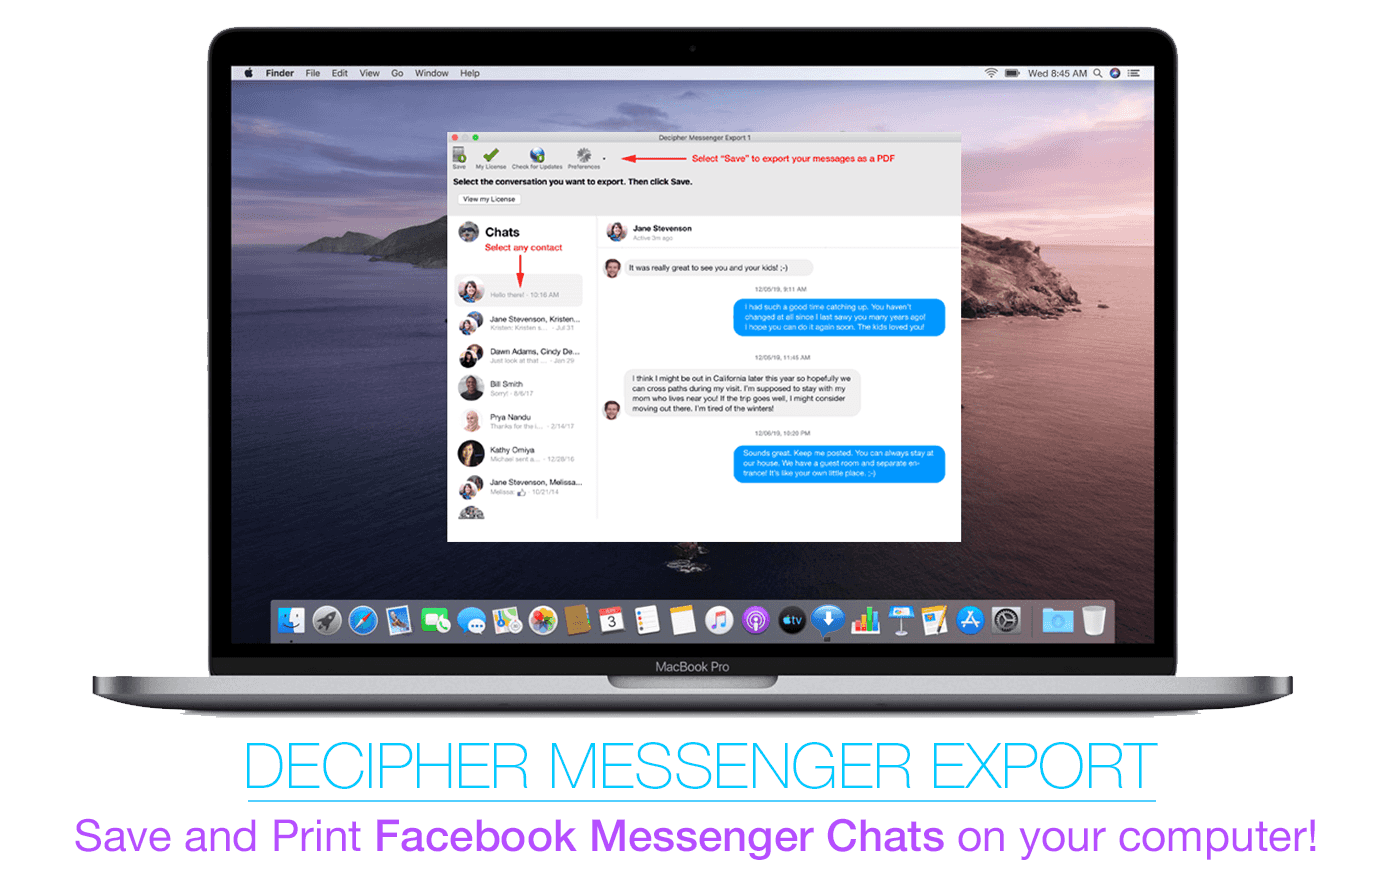 How to Print and Save Facebook Messenger Messages